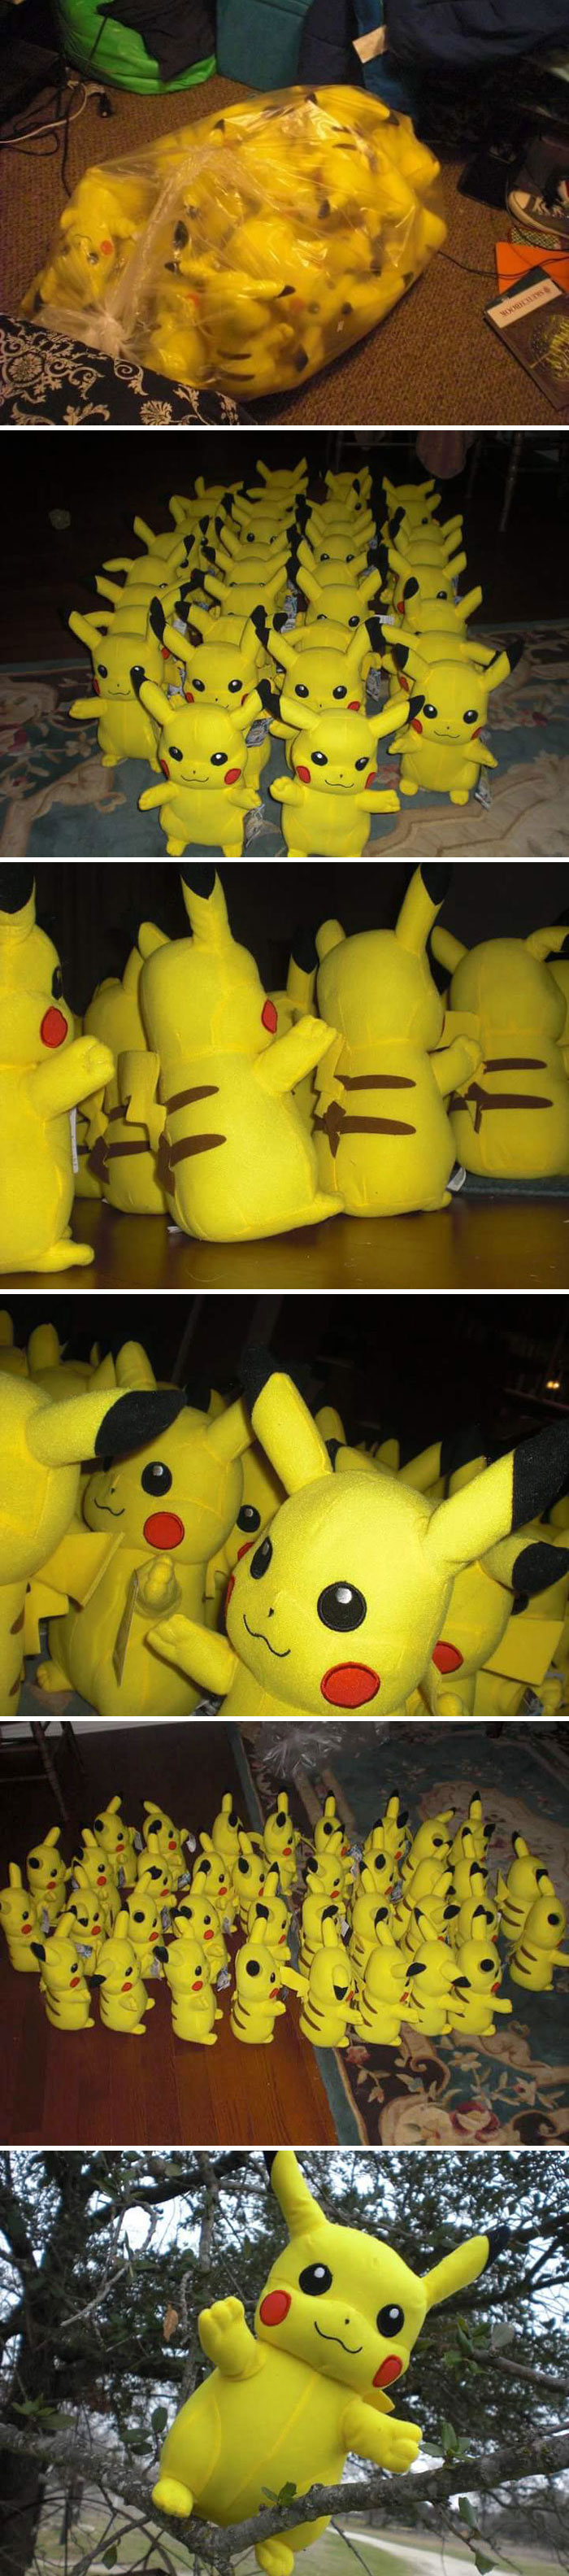 On This Day In 2011, I Found 36 Stuffed Pikachus At A Salvation Army